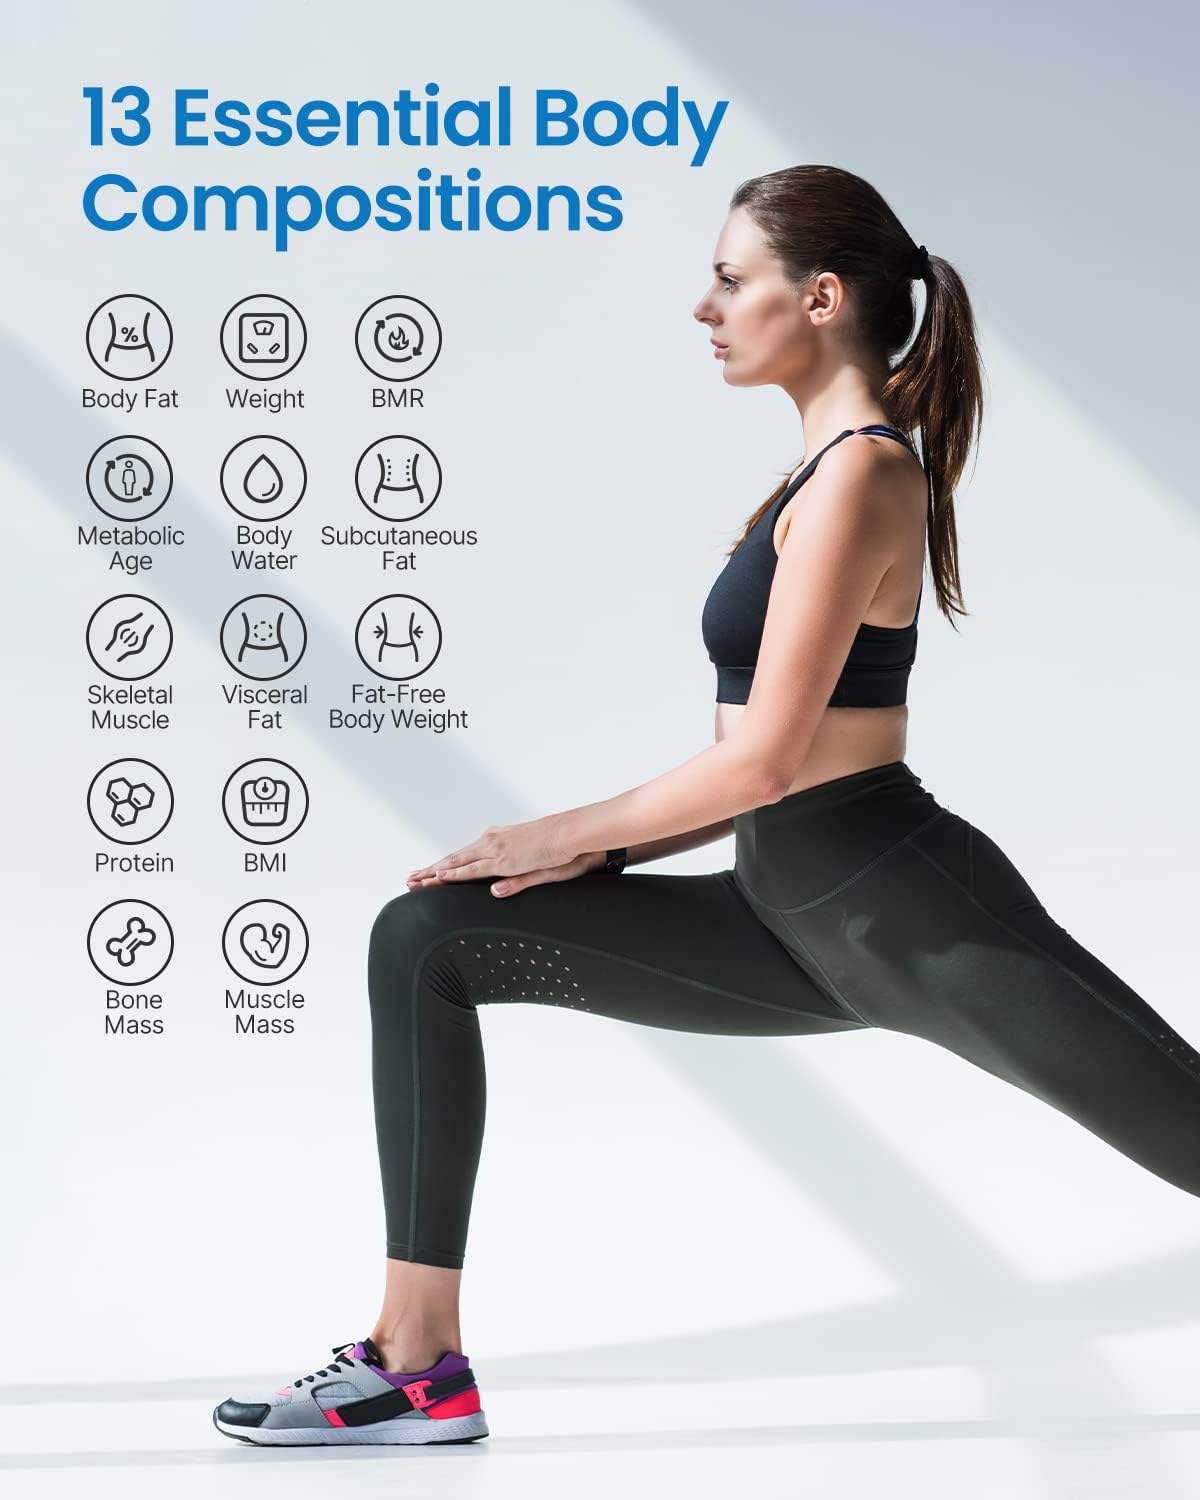 A woman in athletic wear performs a lunge on a white background. Next to her, a Renpho Elis Aspire Smart Body Scale graphic lists "13 essential body compositions" including body fat, weight, BMR, and